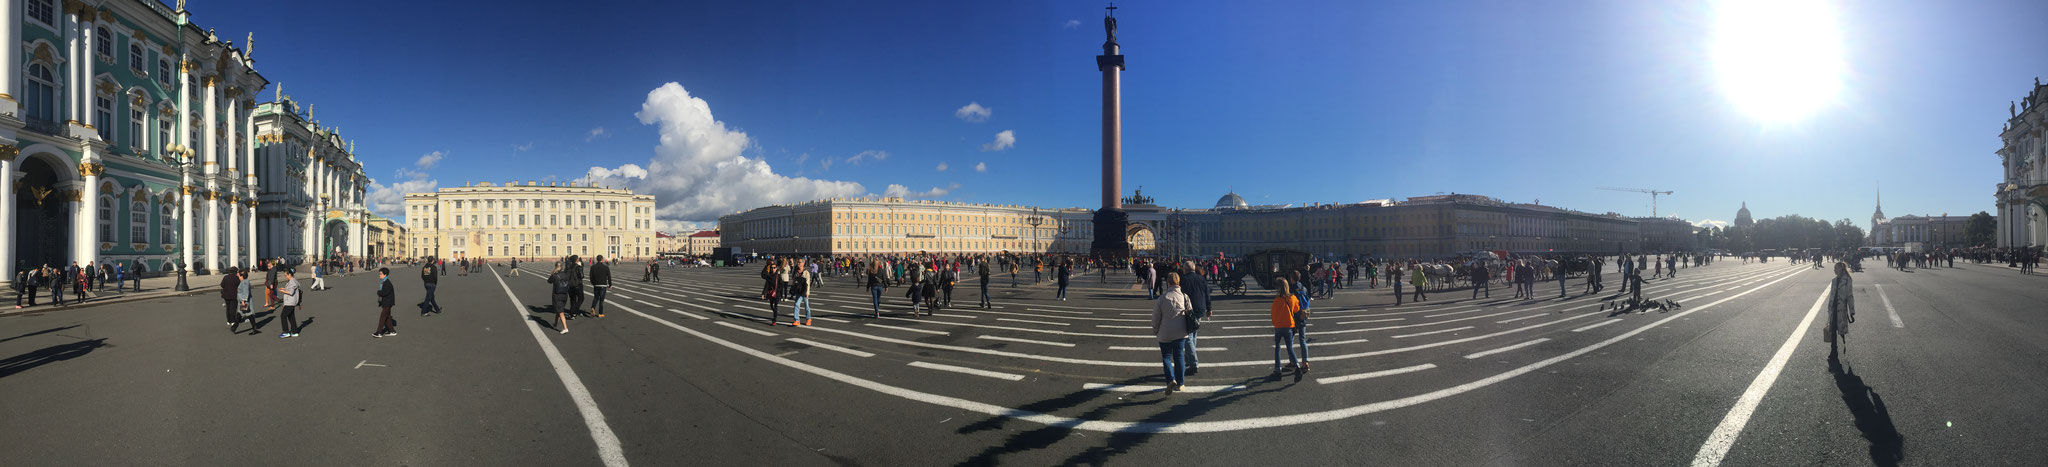 Winter Palace and Square